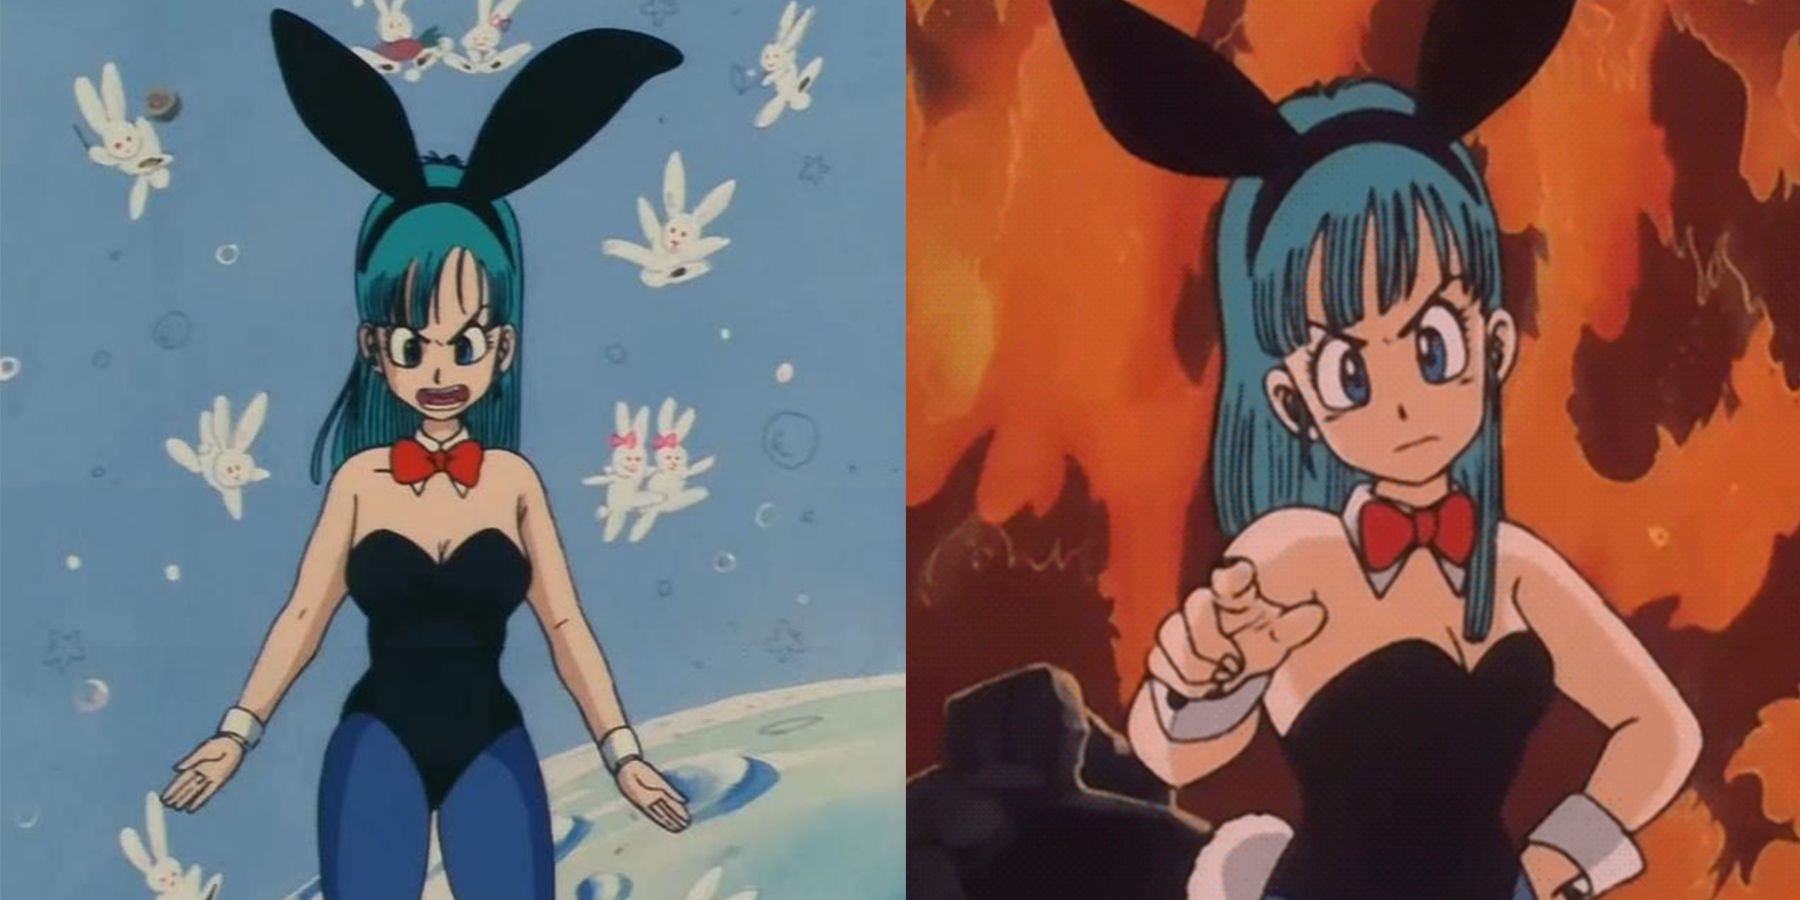 Dragon Ball's Bulma is angry in bunny outfit